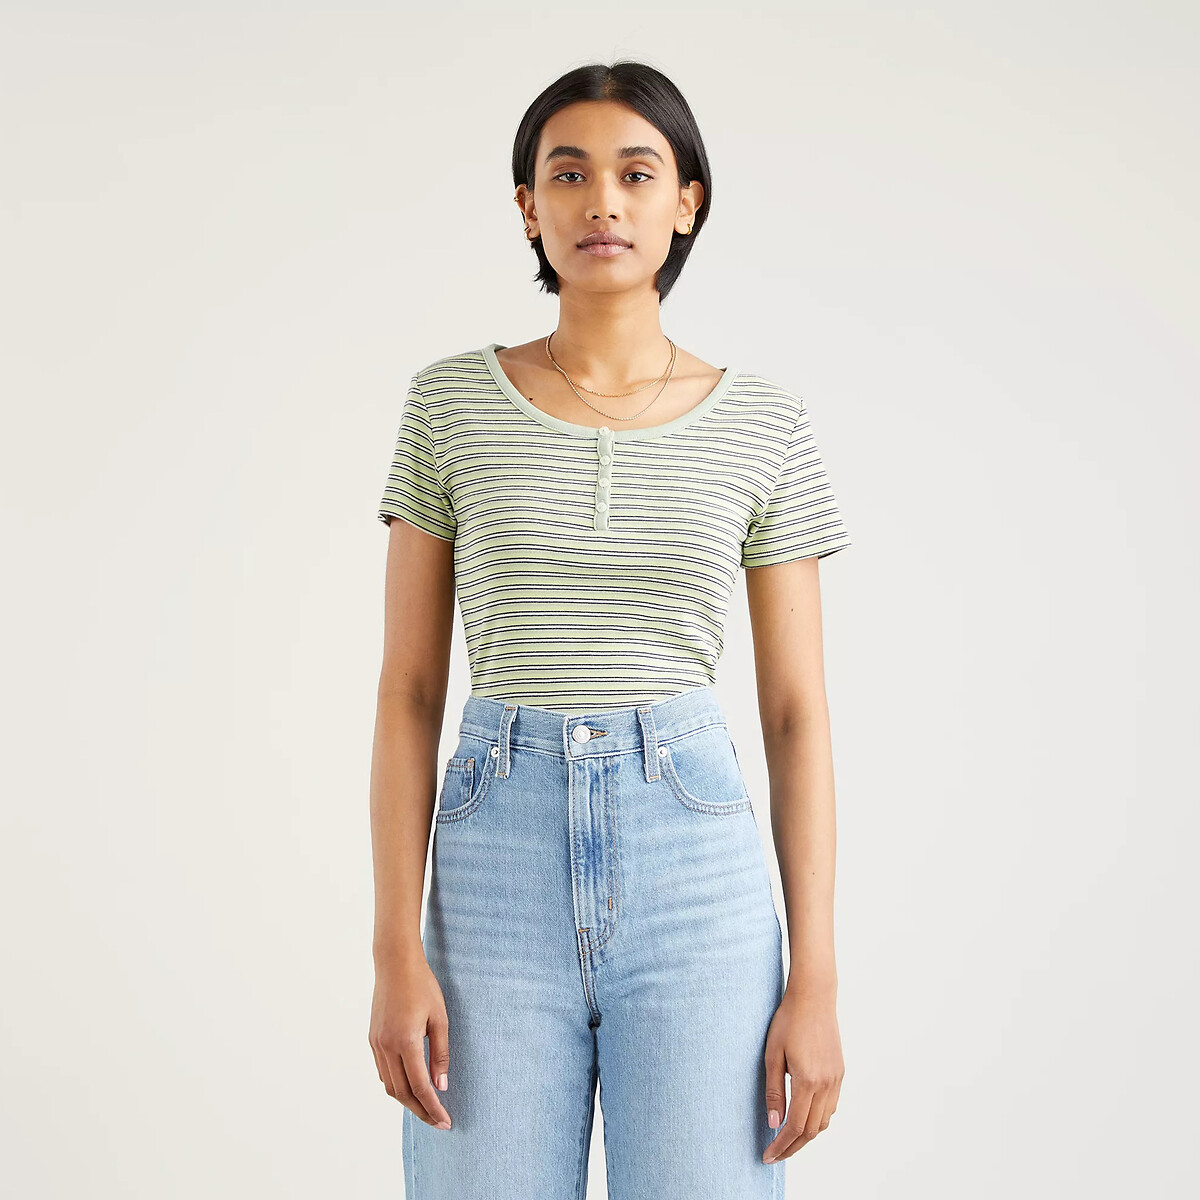 Cotton crew neck t-shirt with short sleeves, green, Levi's | La Redoute